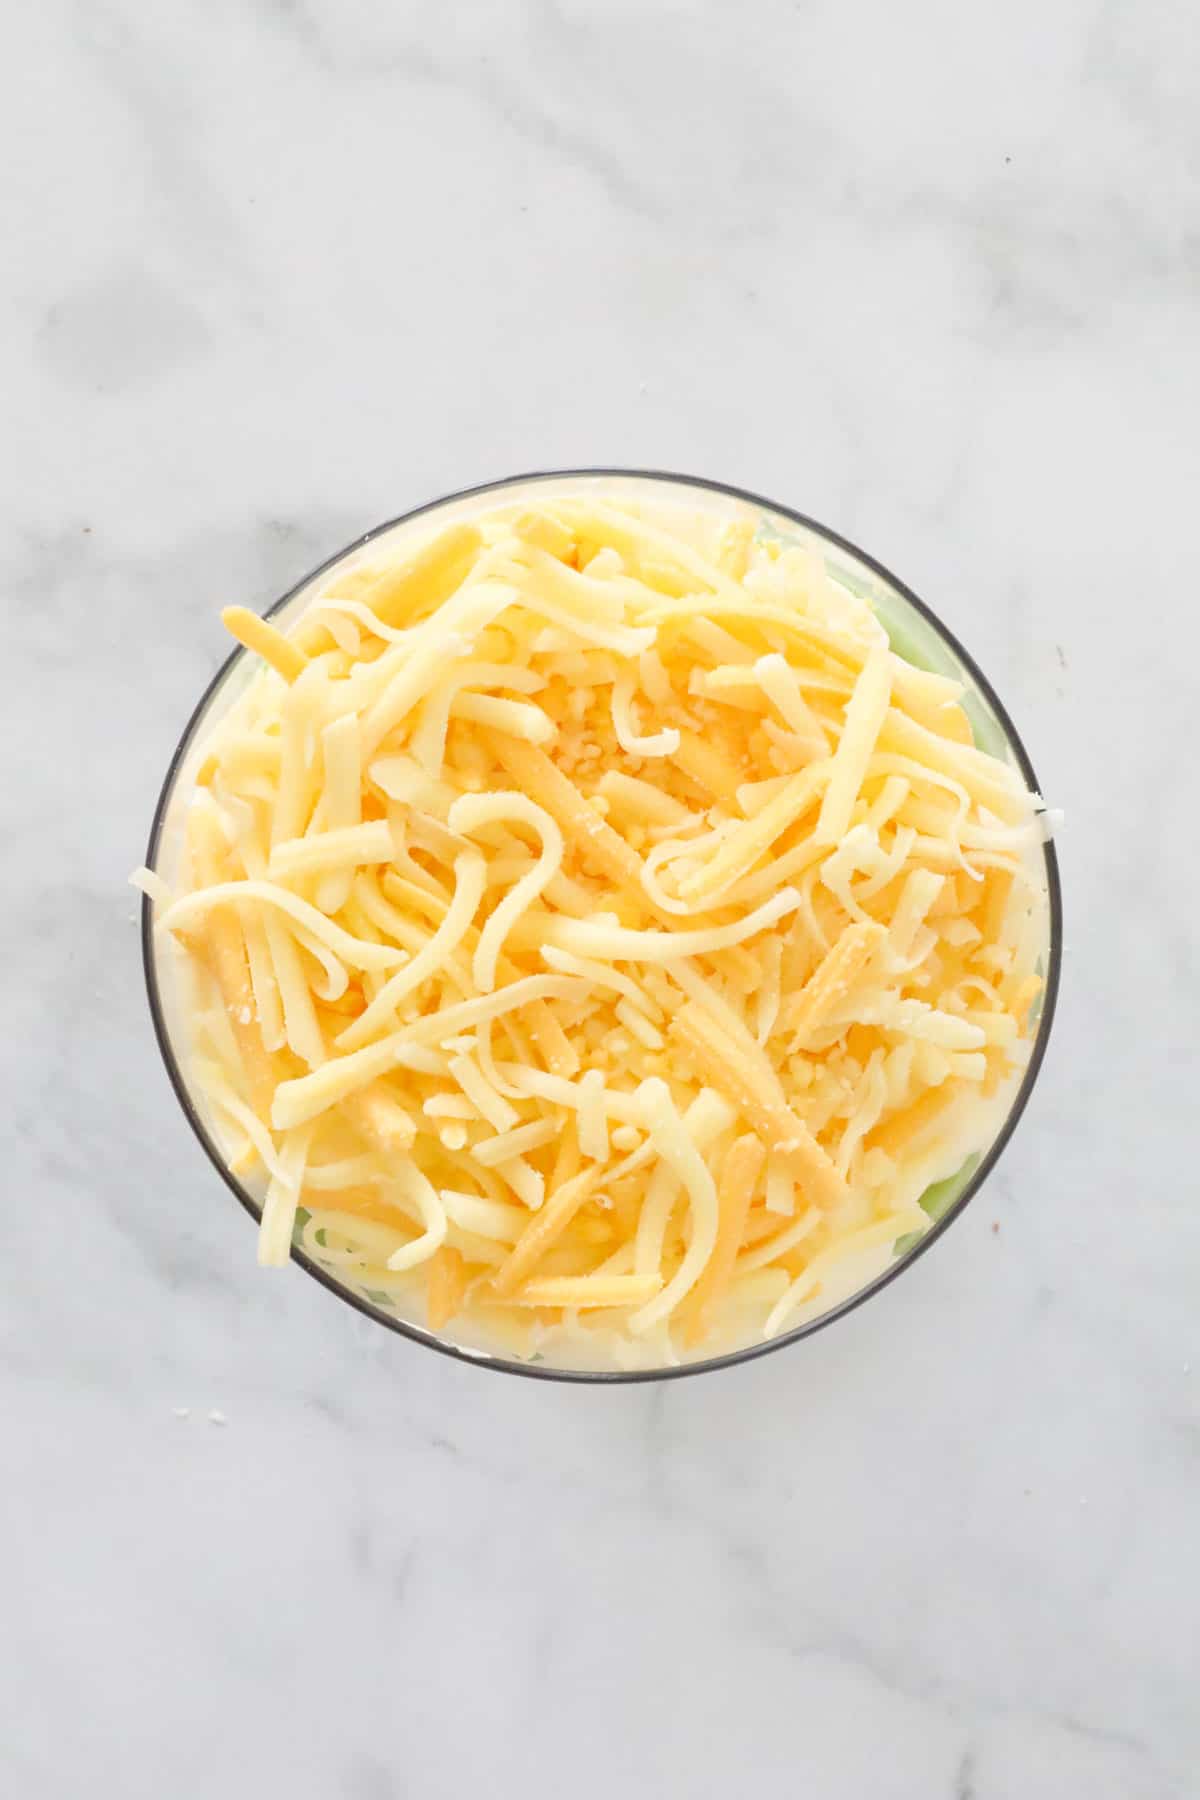 Looking down on a dip bowl topped with grated cheese.